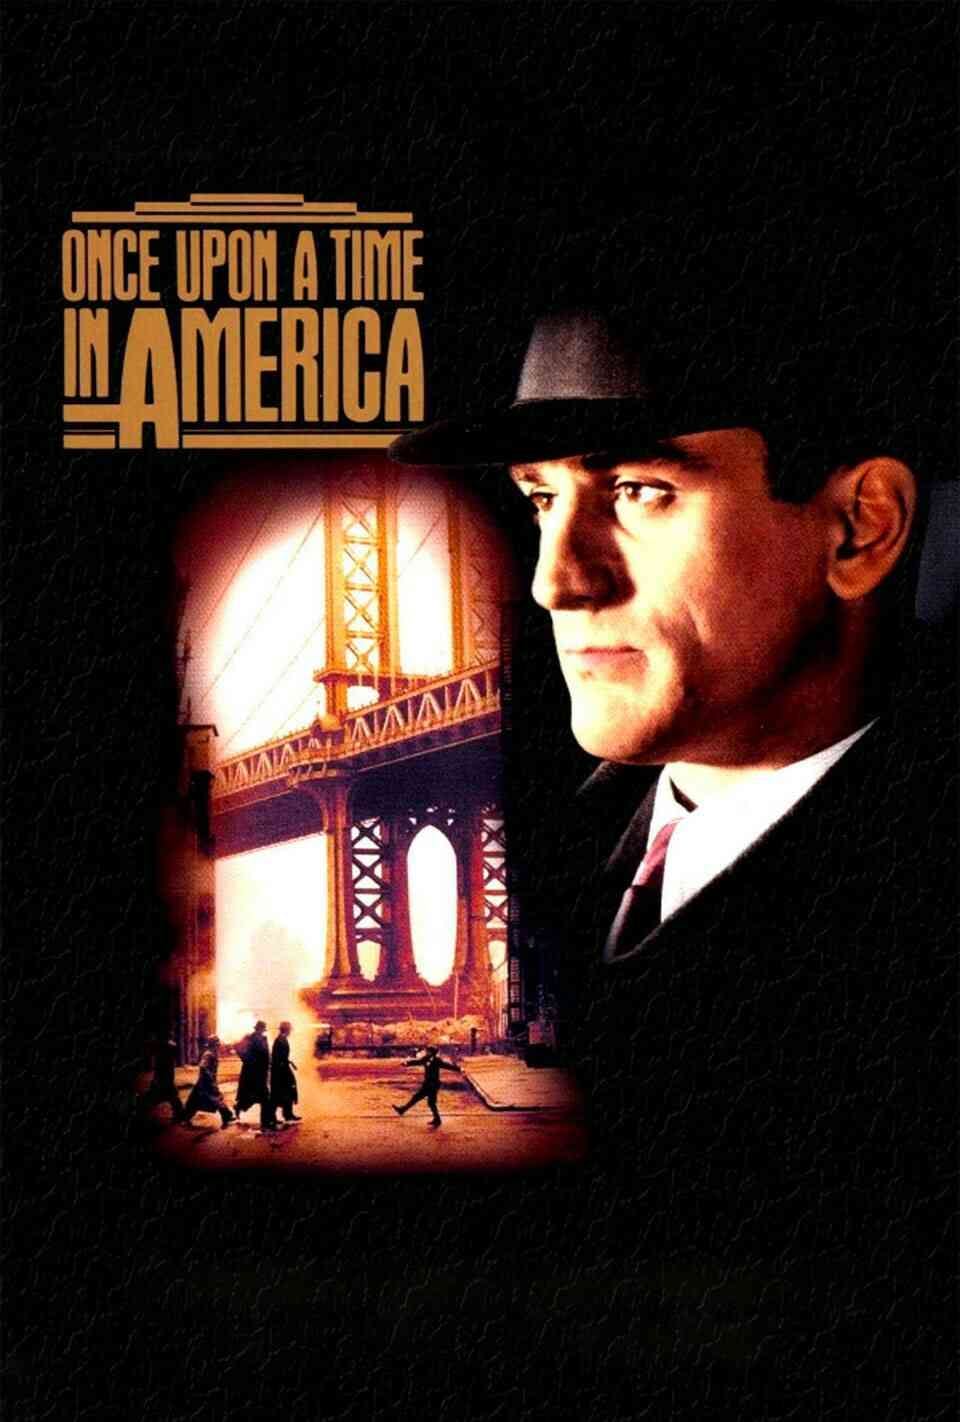 Read Once Upon a Time in America screenplay.